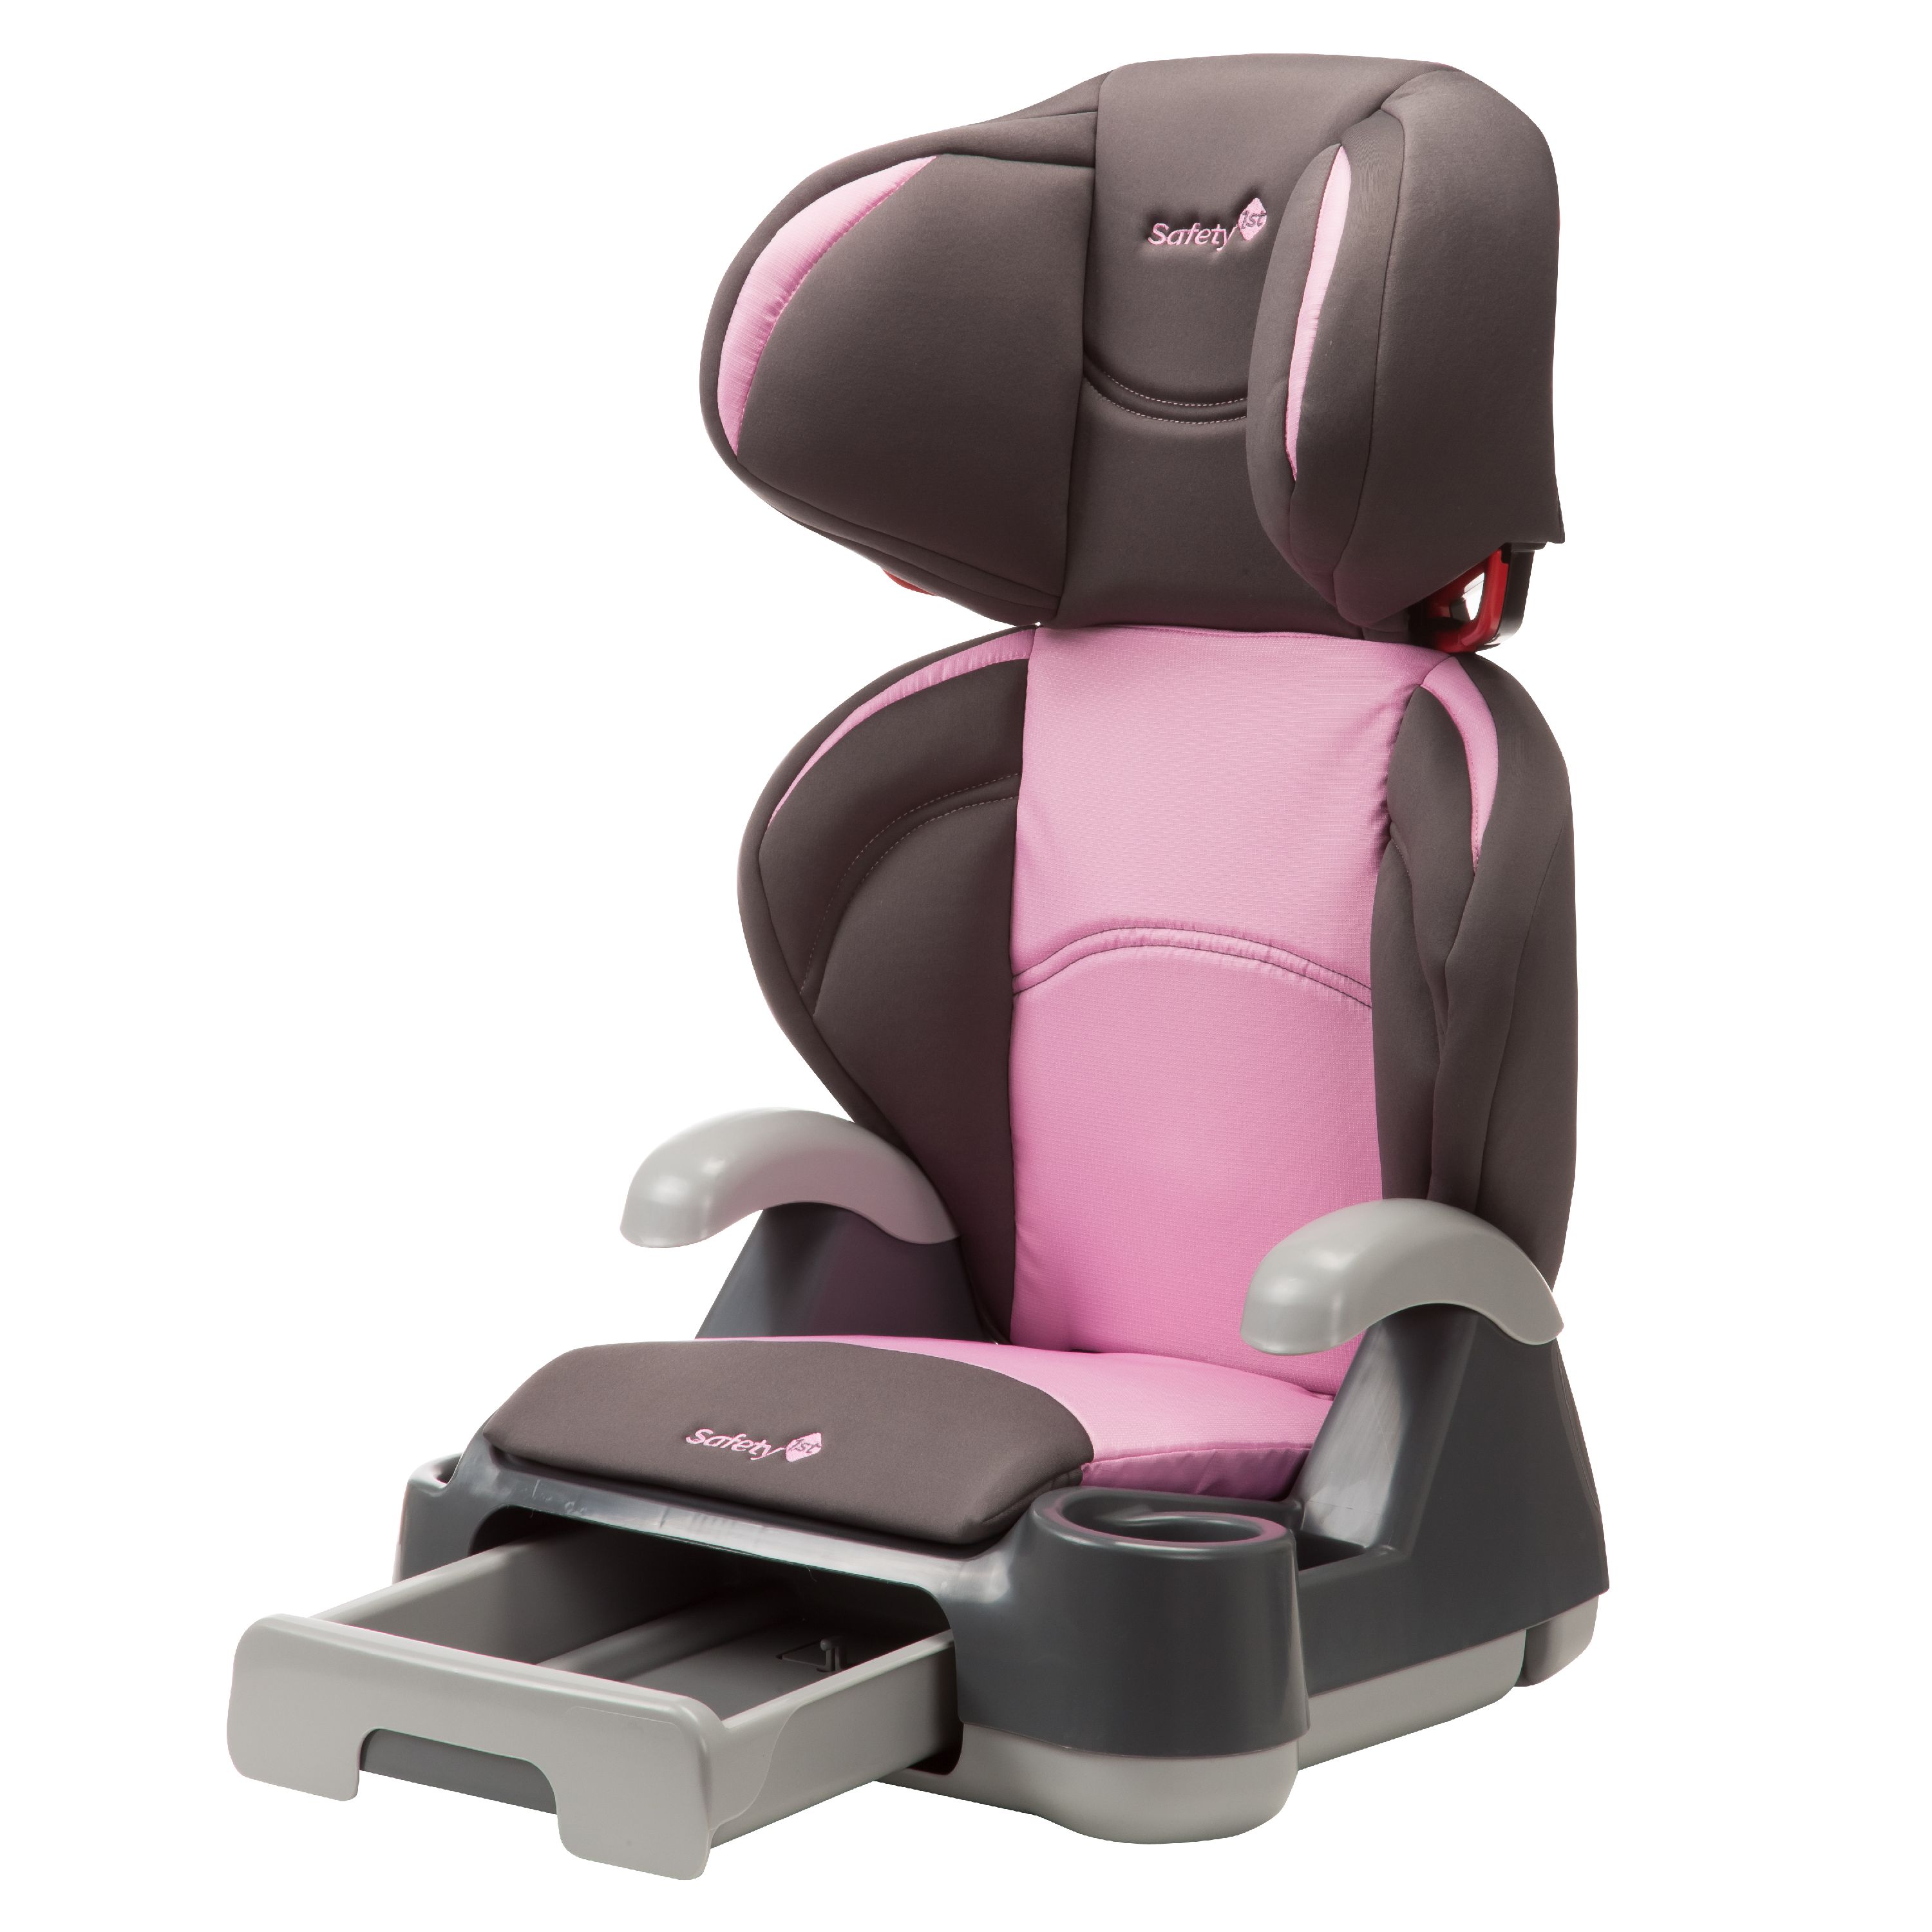 Safety 1st Store 'n Go Belt-Positioning Booster Car Seat, Nora - image 1 of 5